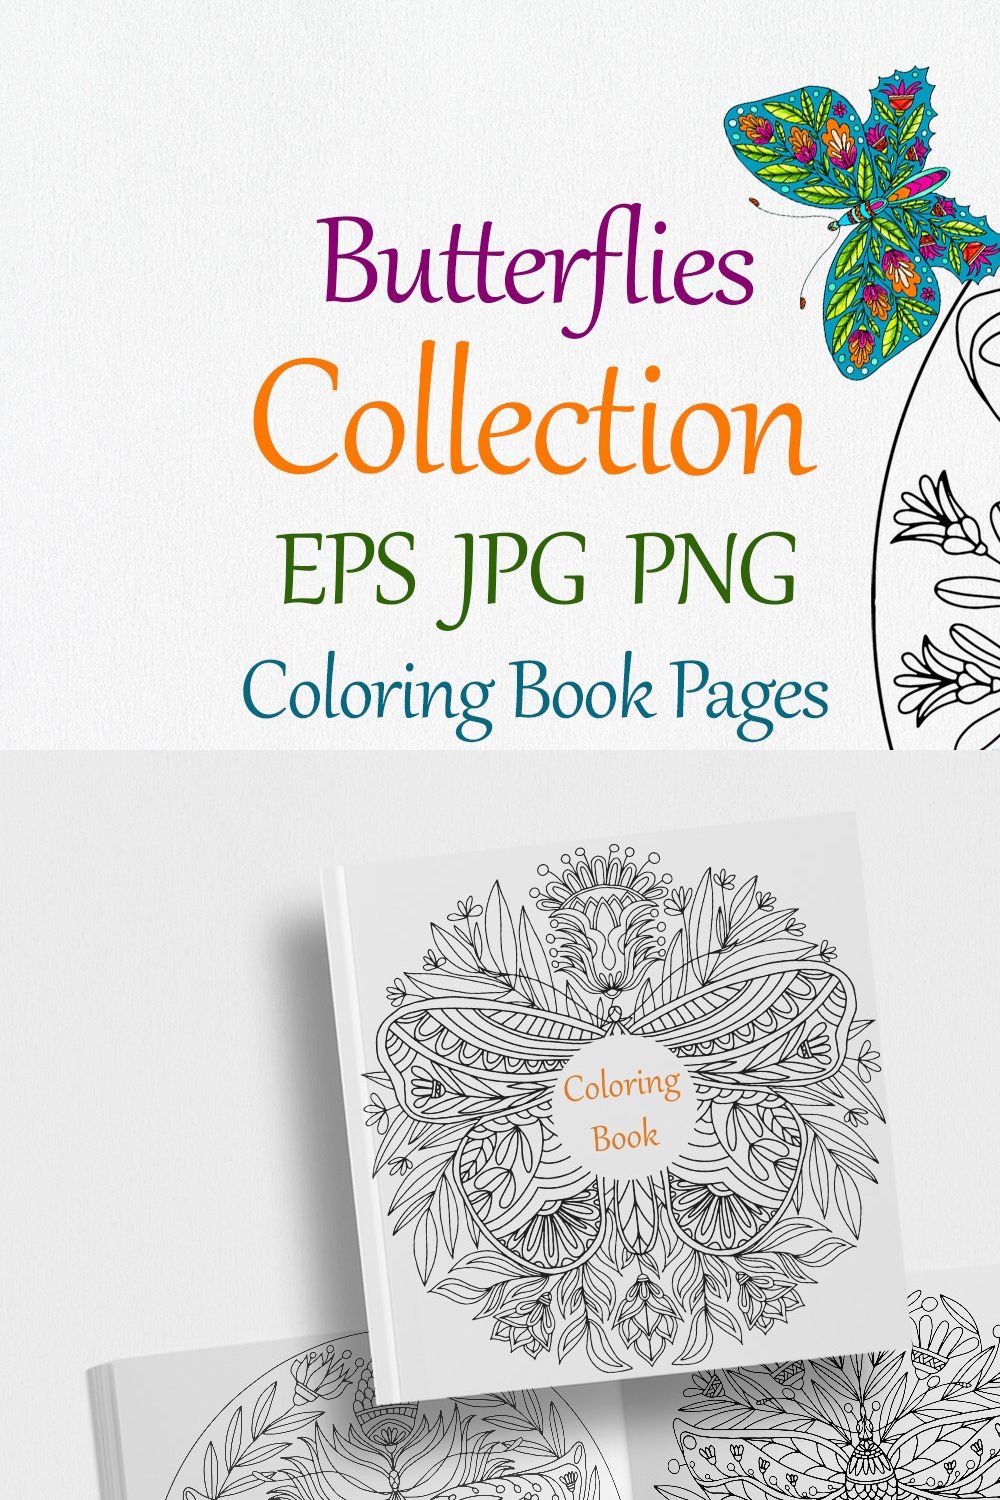 Mandala collection of butterflies pinterest preview image.